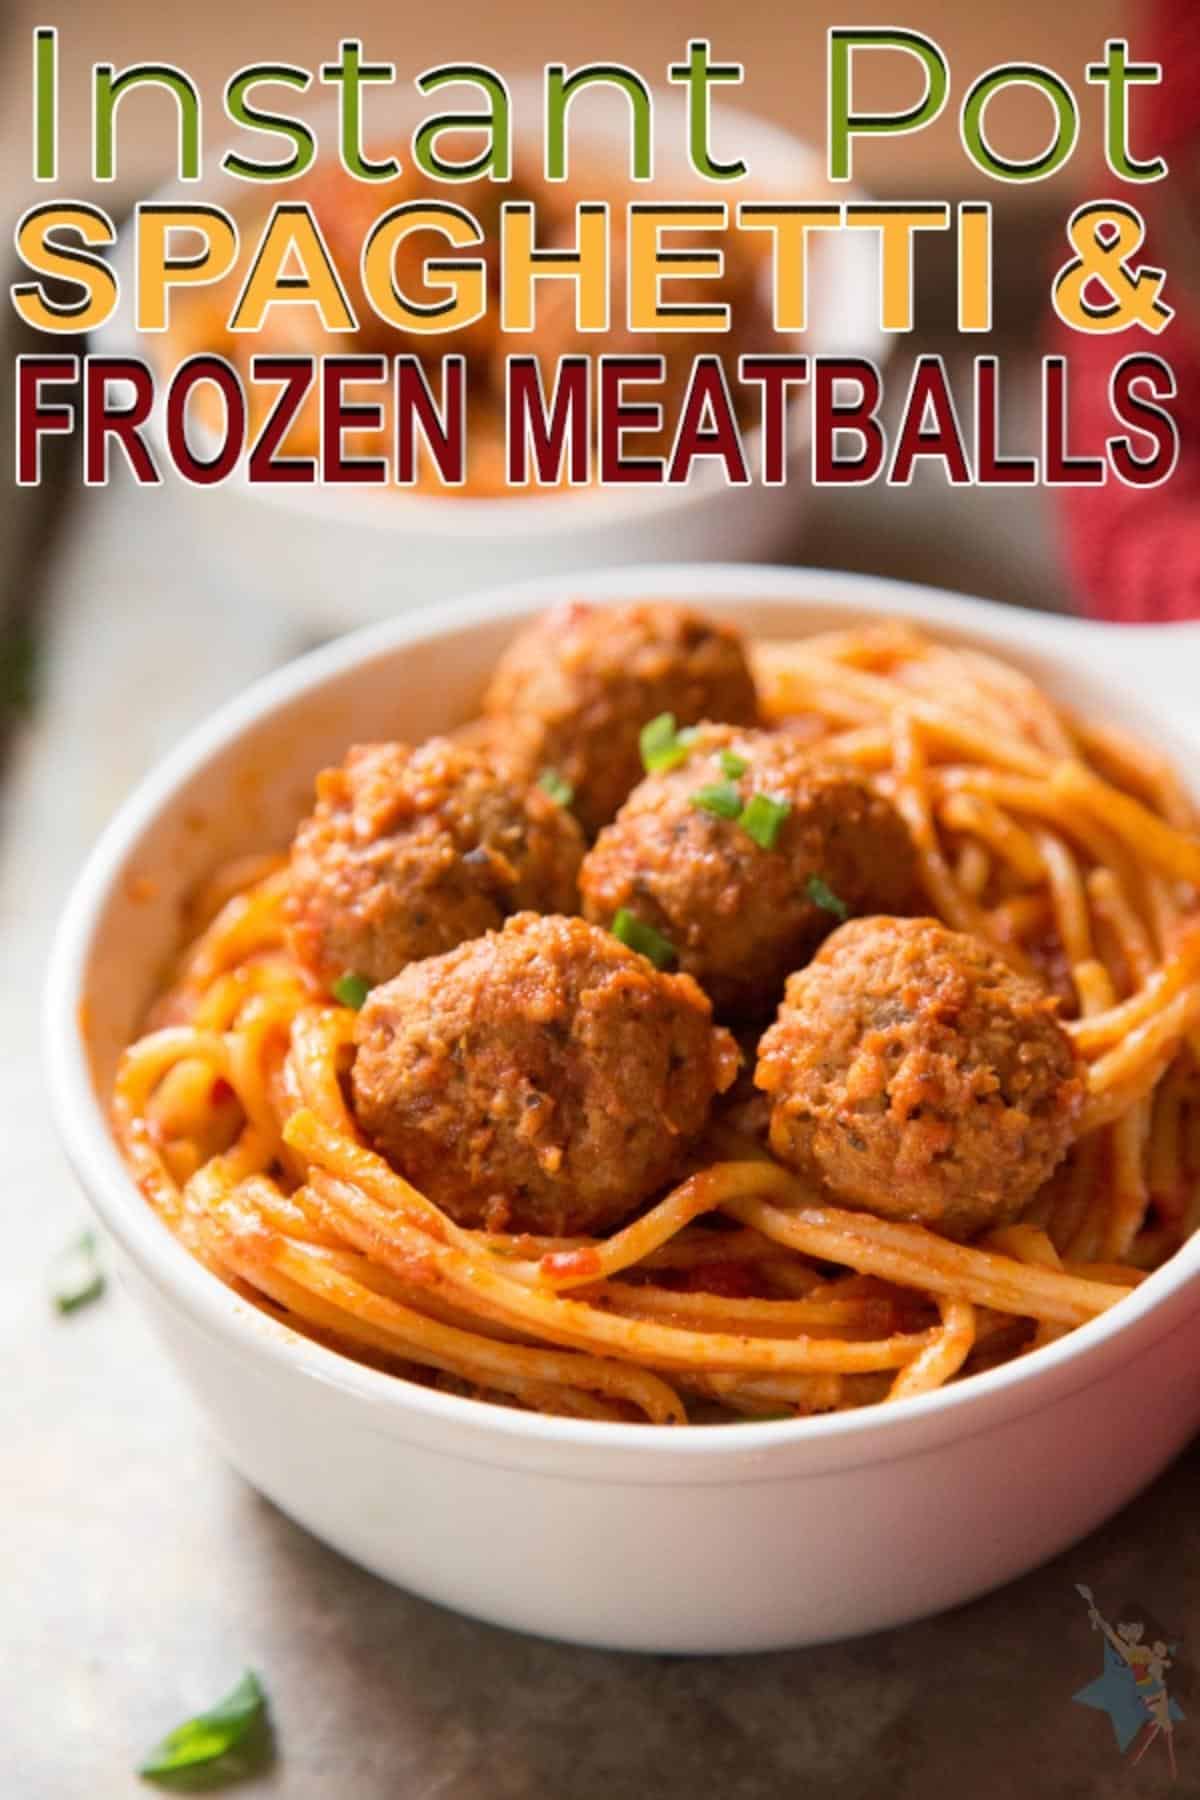 A white bowl of Spaghetti and Meatballs on a table with another bowl in the background with title text reading Instant Pot Spaghetti & Frozen Meatballs.